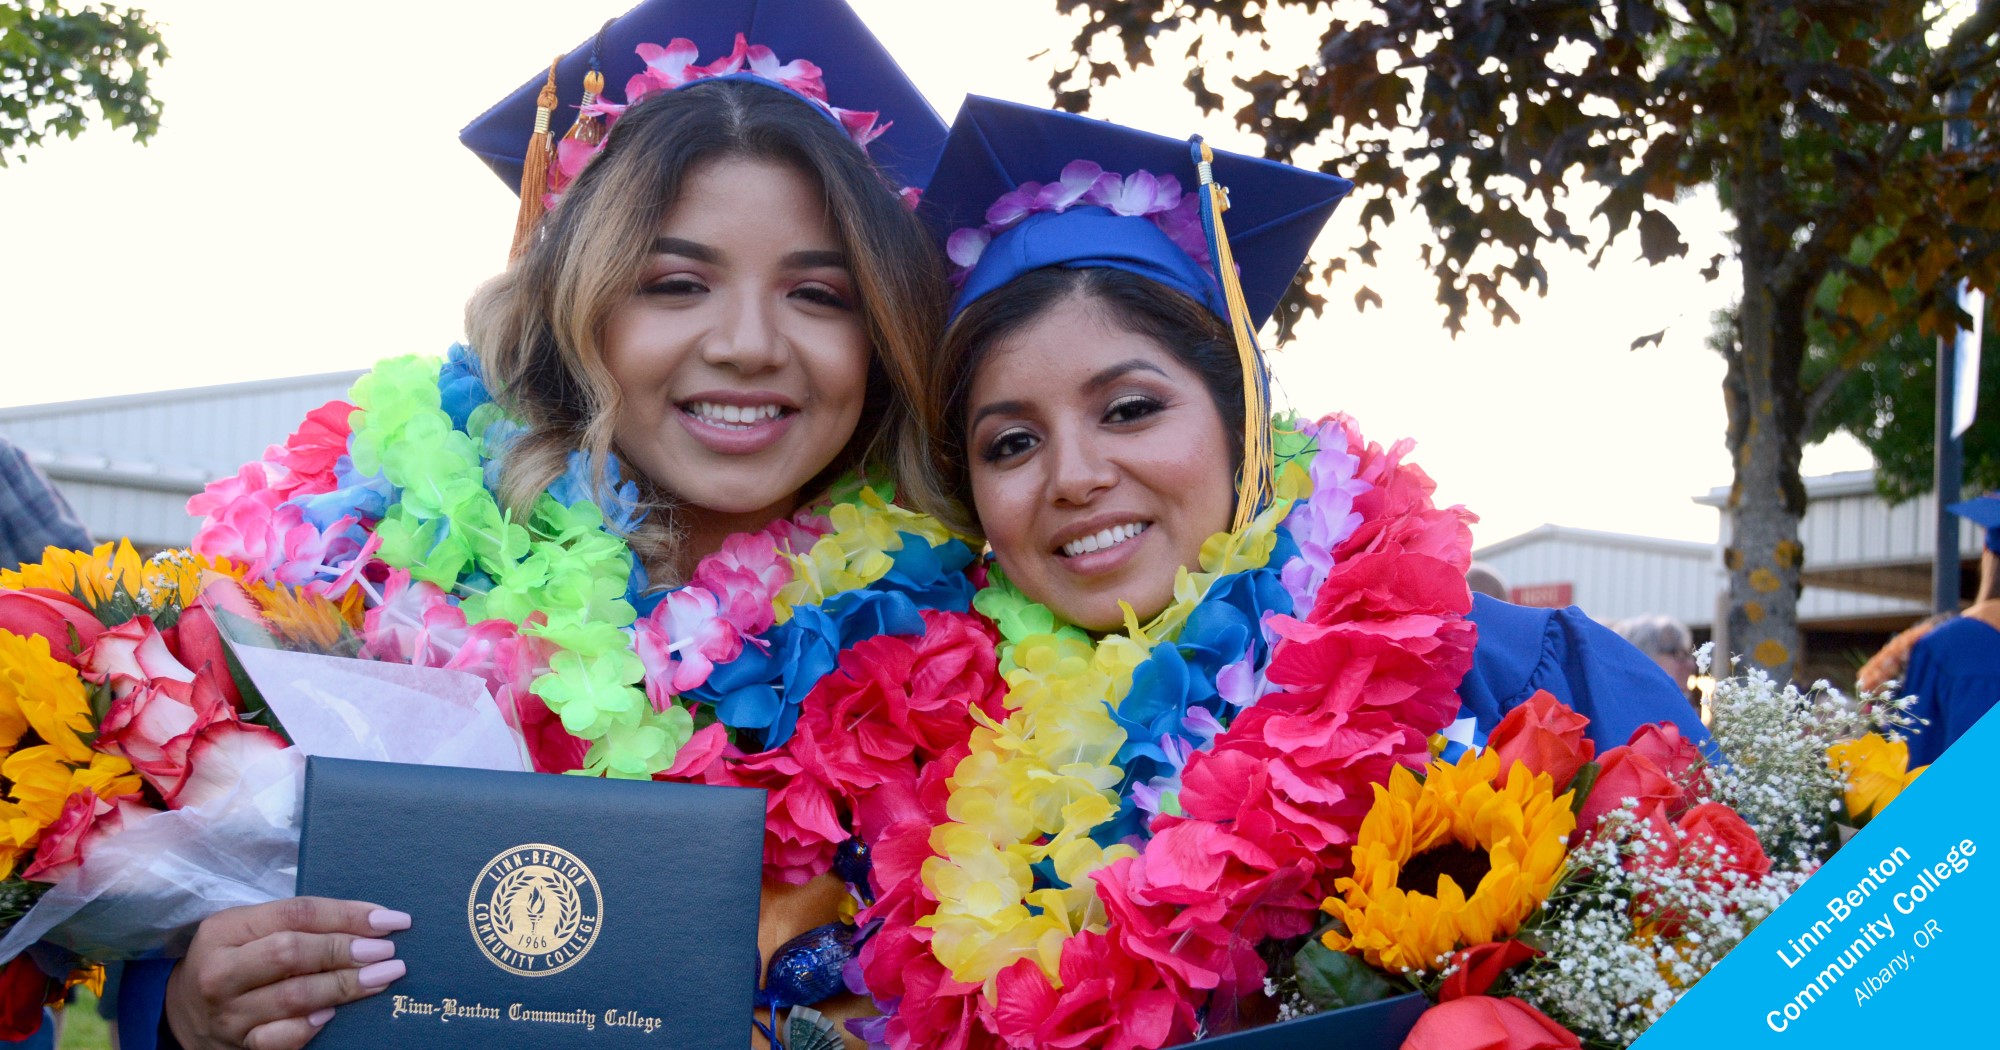 Latina grads from Linn-Benton Community College smiling with leis and flowers